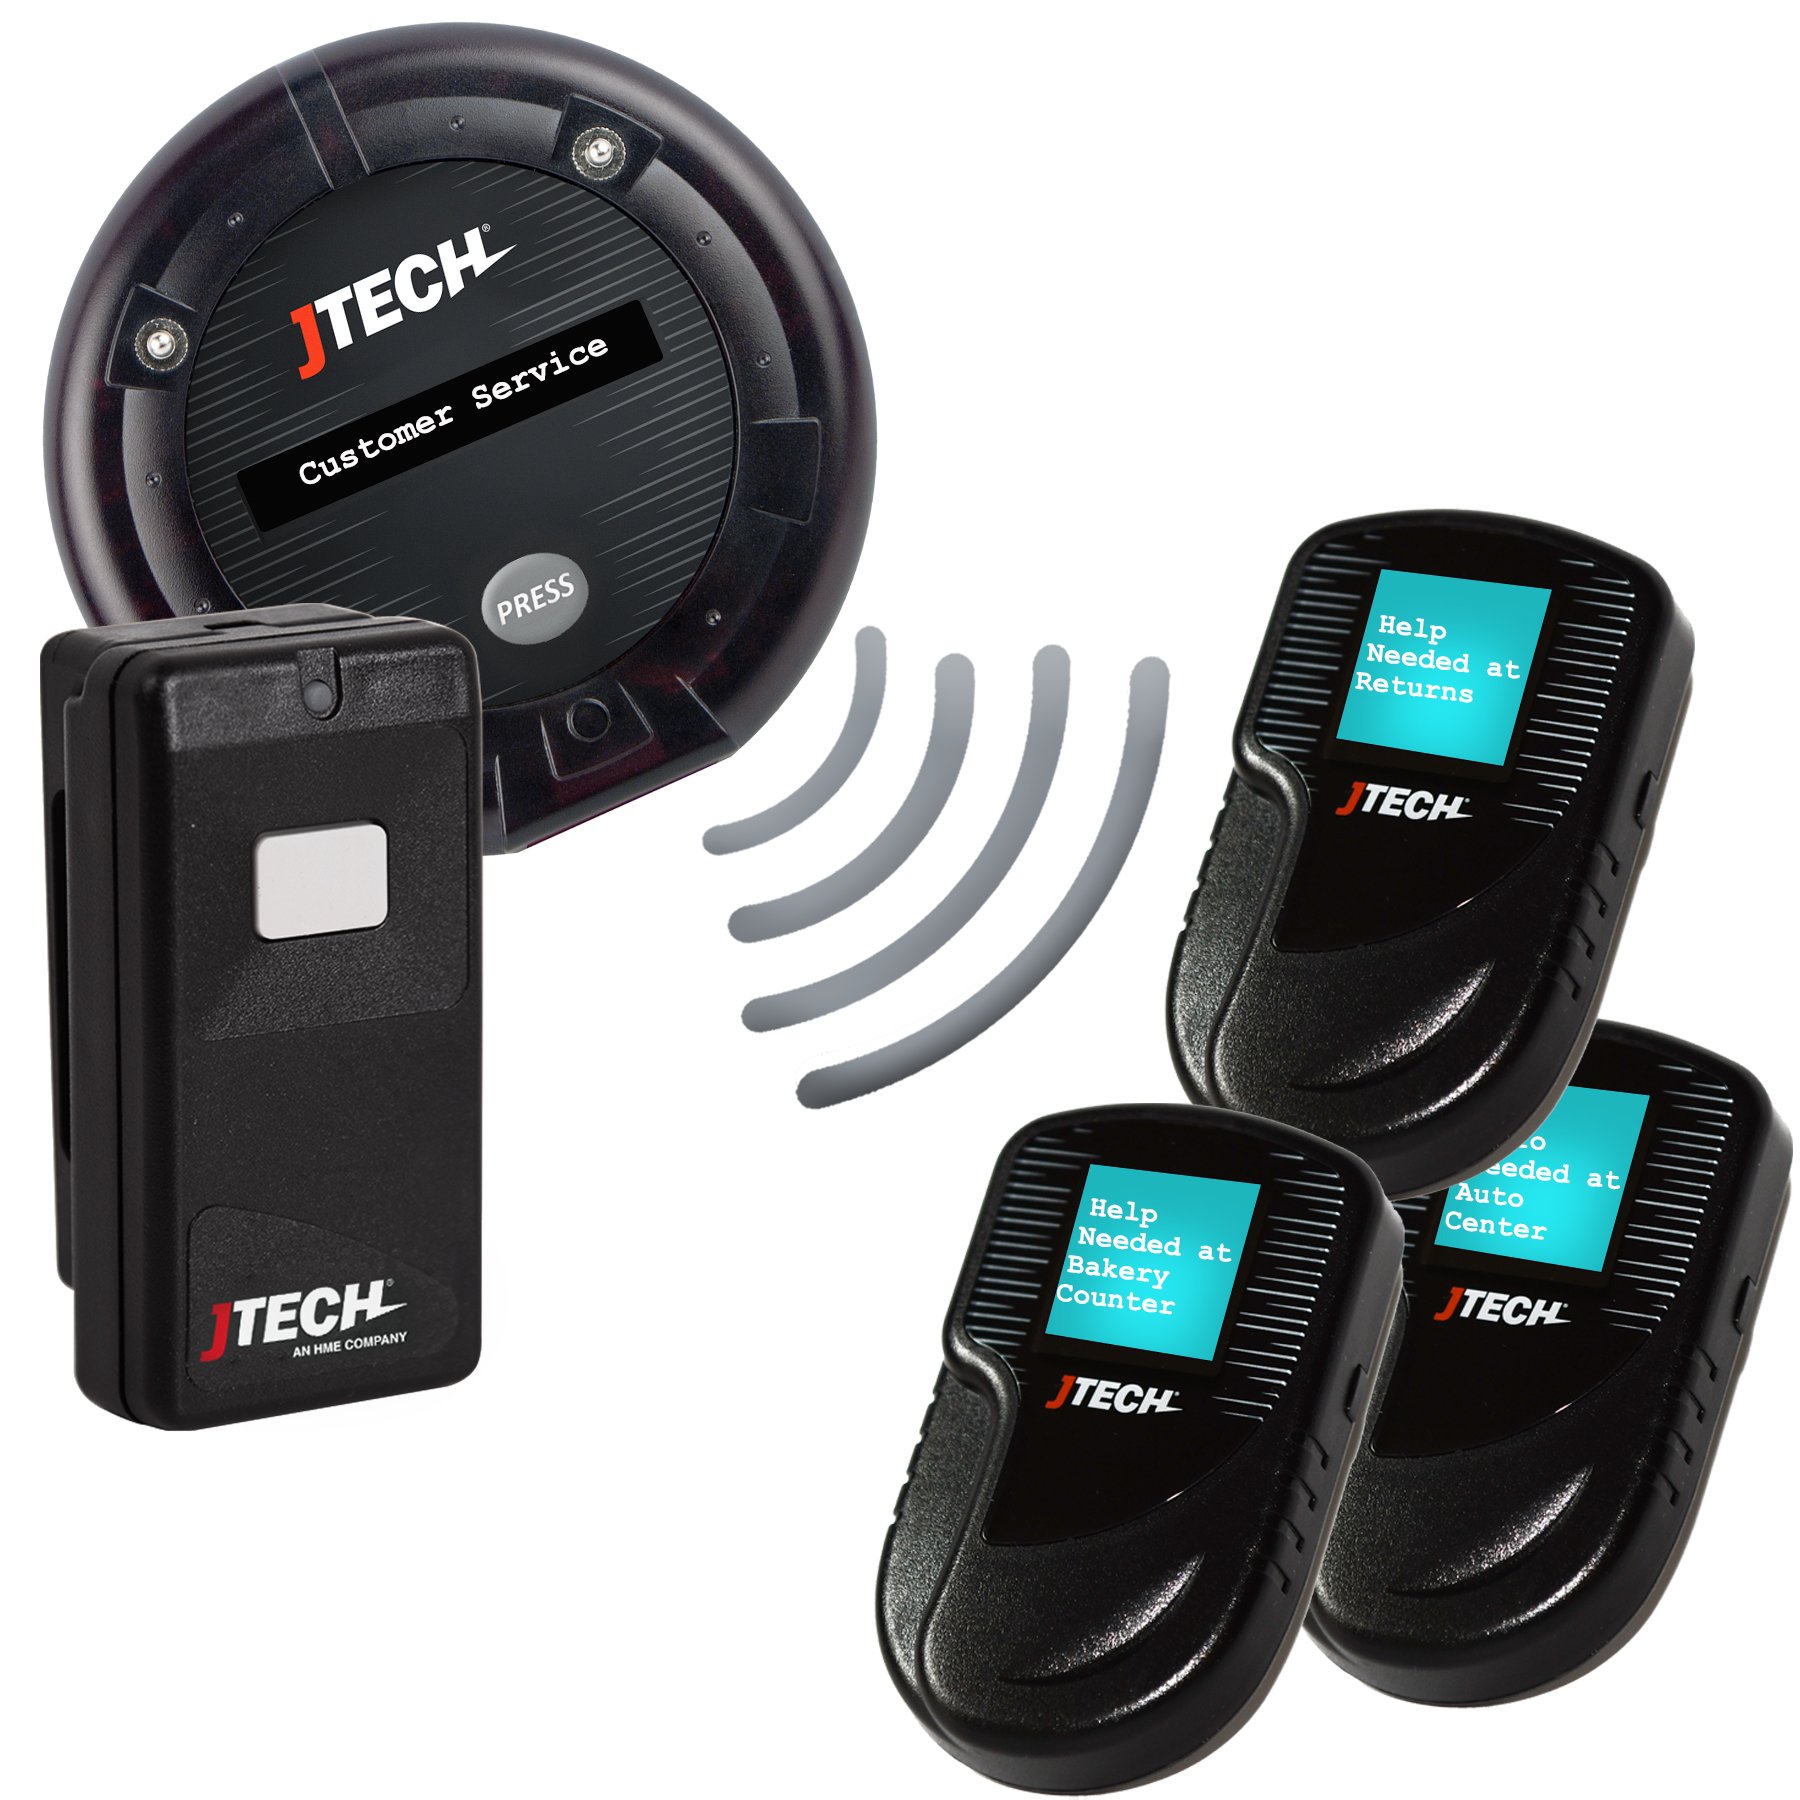 SmartCall Alert Pagers with Buttons - Retail